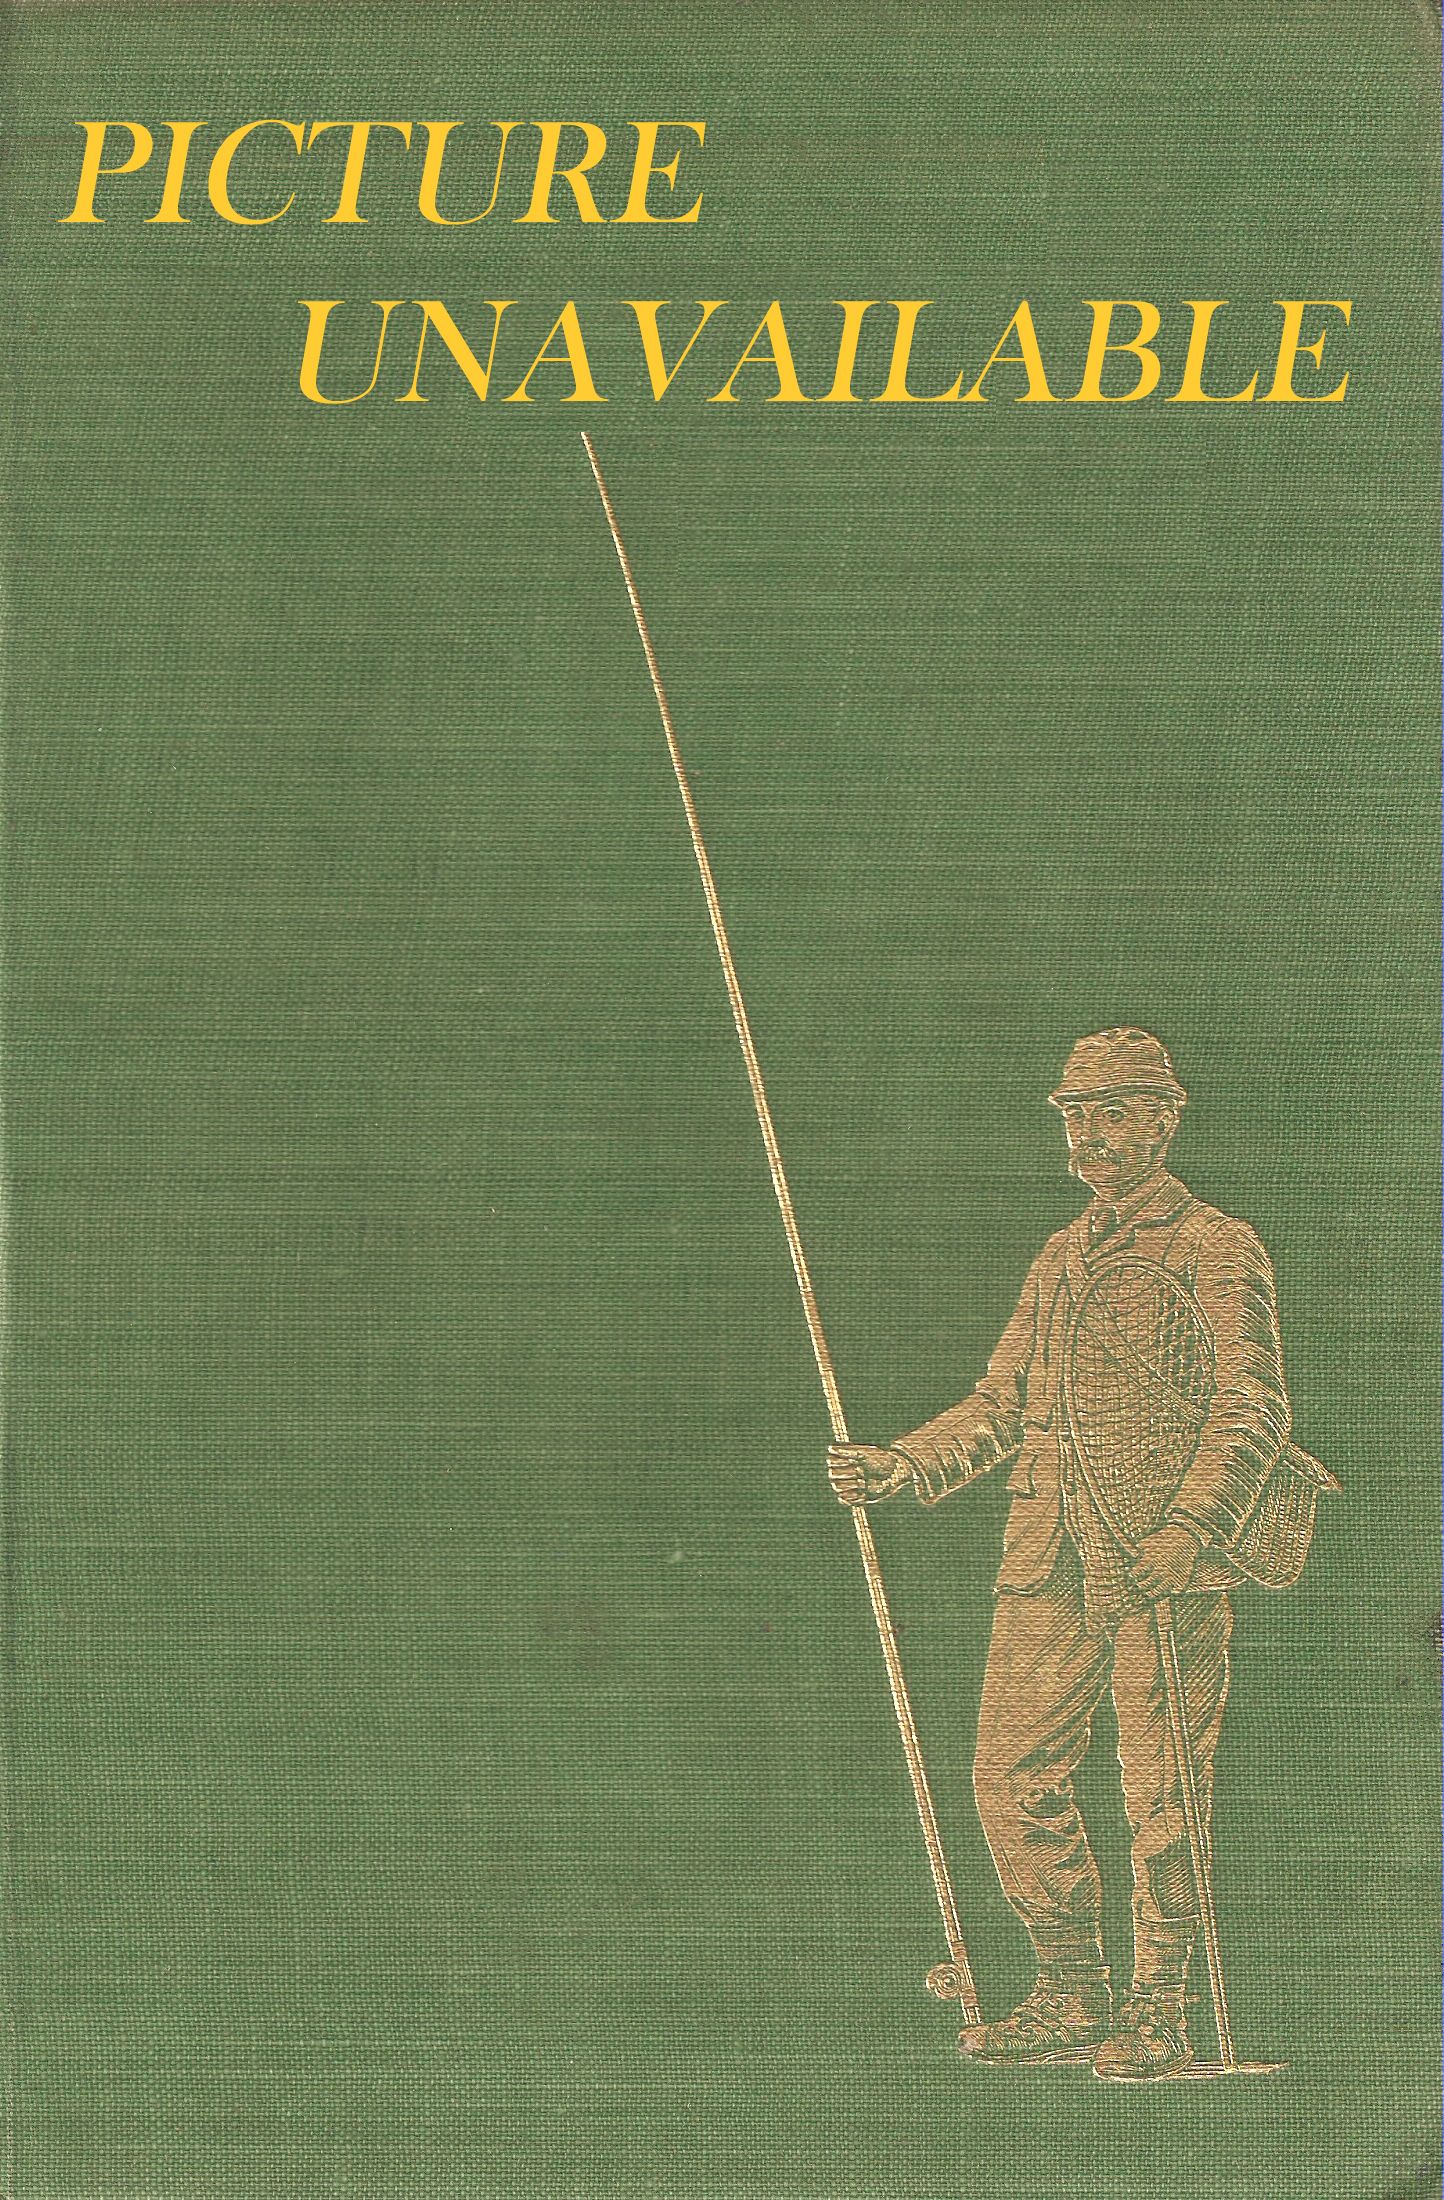 AN ANGLER AT LARGE. By William Caine (W. Quilliam of the 